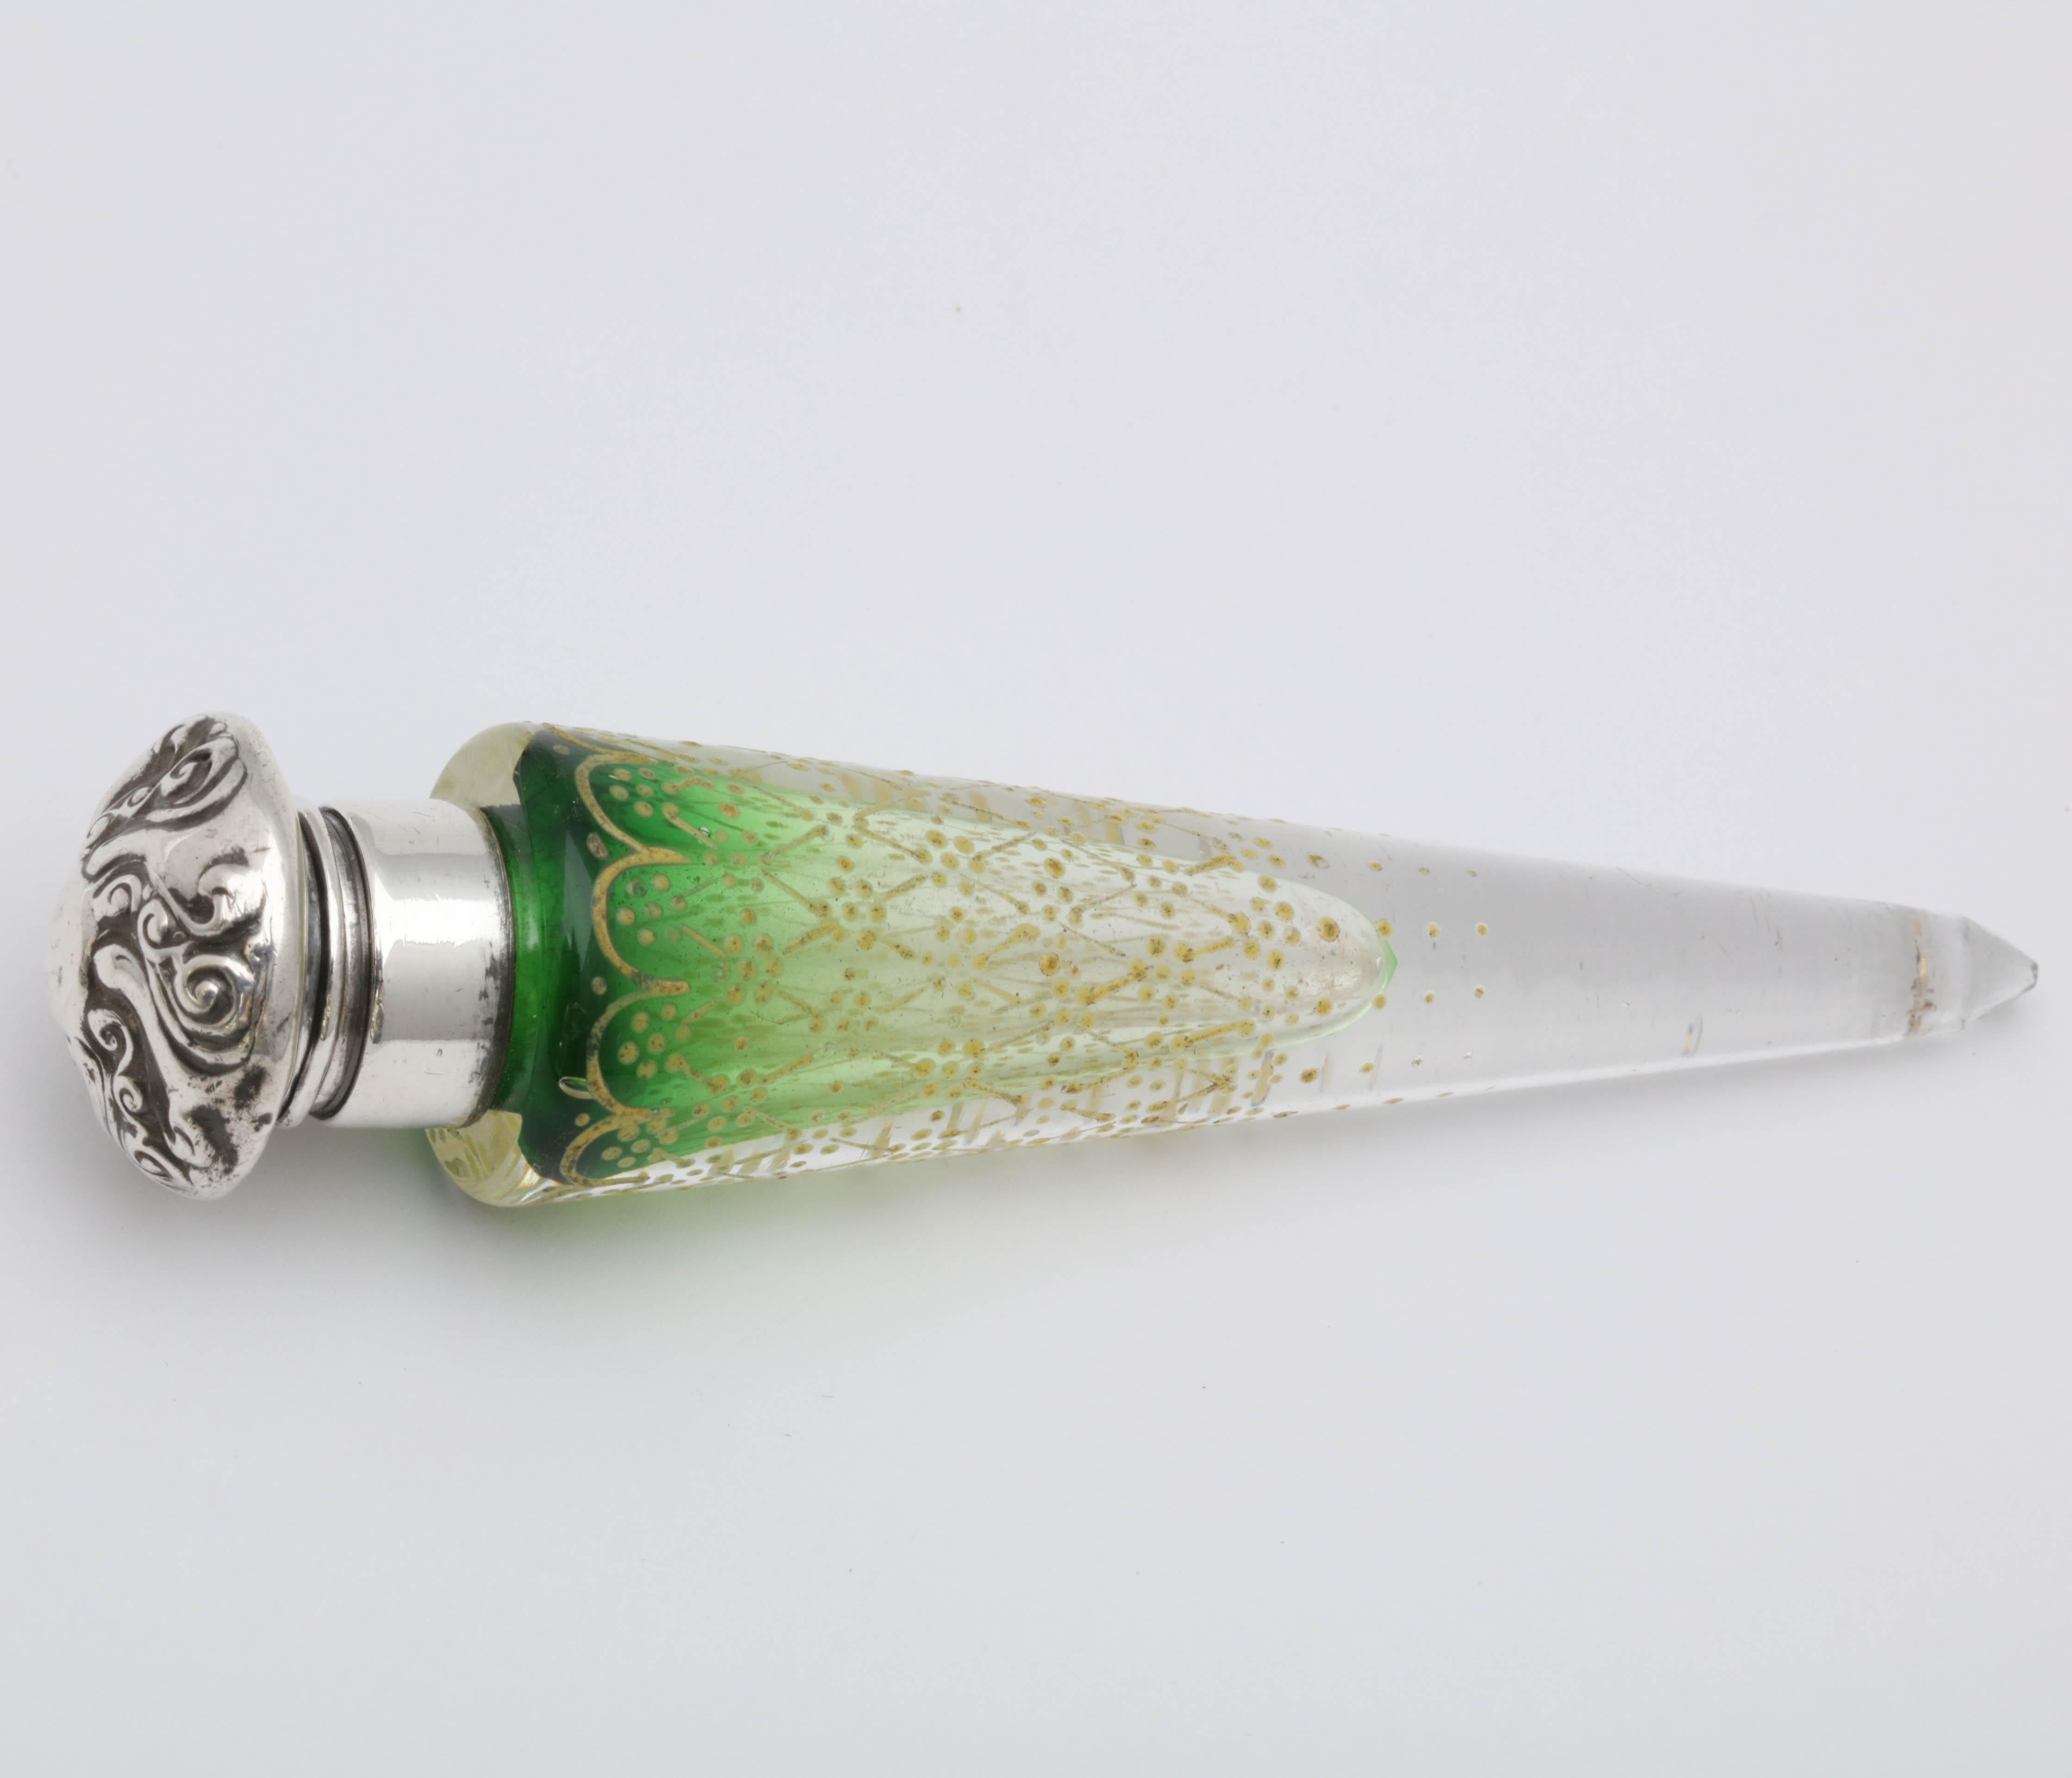 Beautiful, sterling silver-mounted, gold enameled, green crystal, lay-down perfume bottle, Woodside Silver Co., New York, Ca. 1896. Measures 4 3/4 inches long x 1 inch wide at widest point. Color of green crystal graduates from dark green to clear.